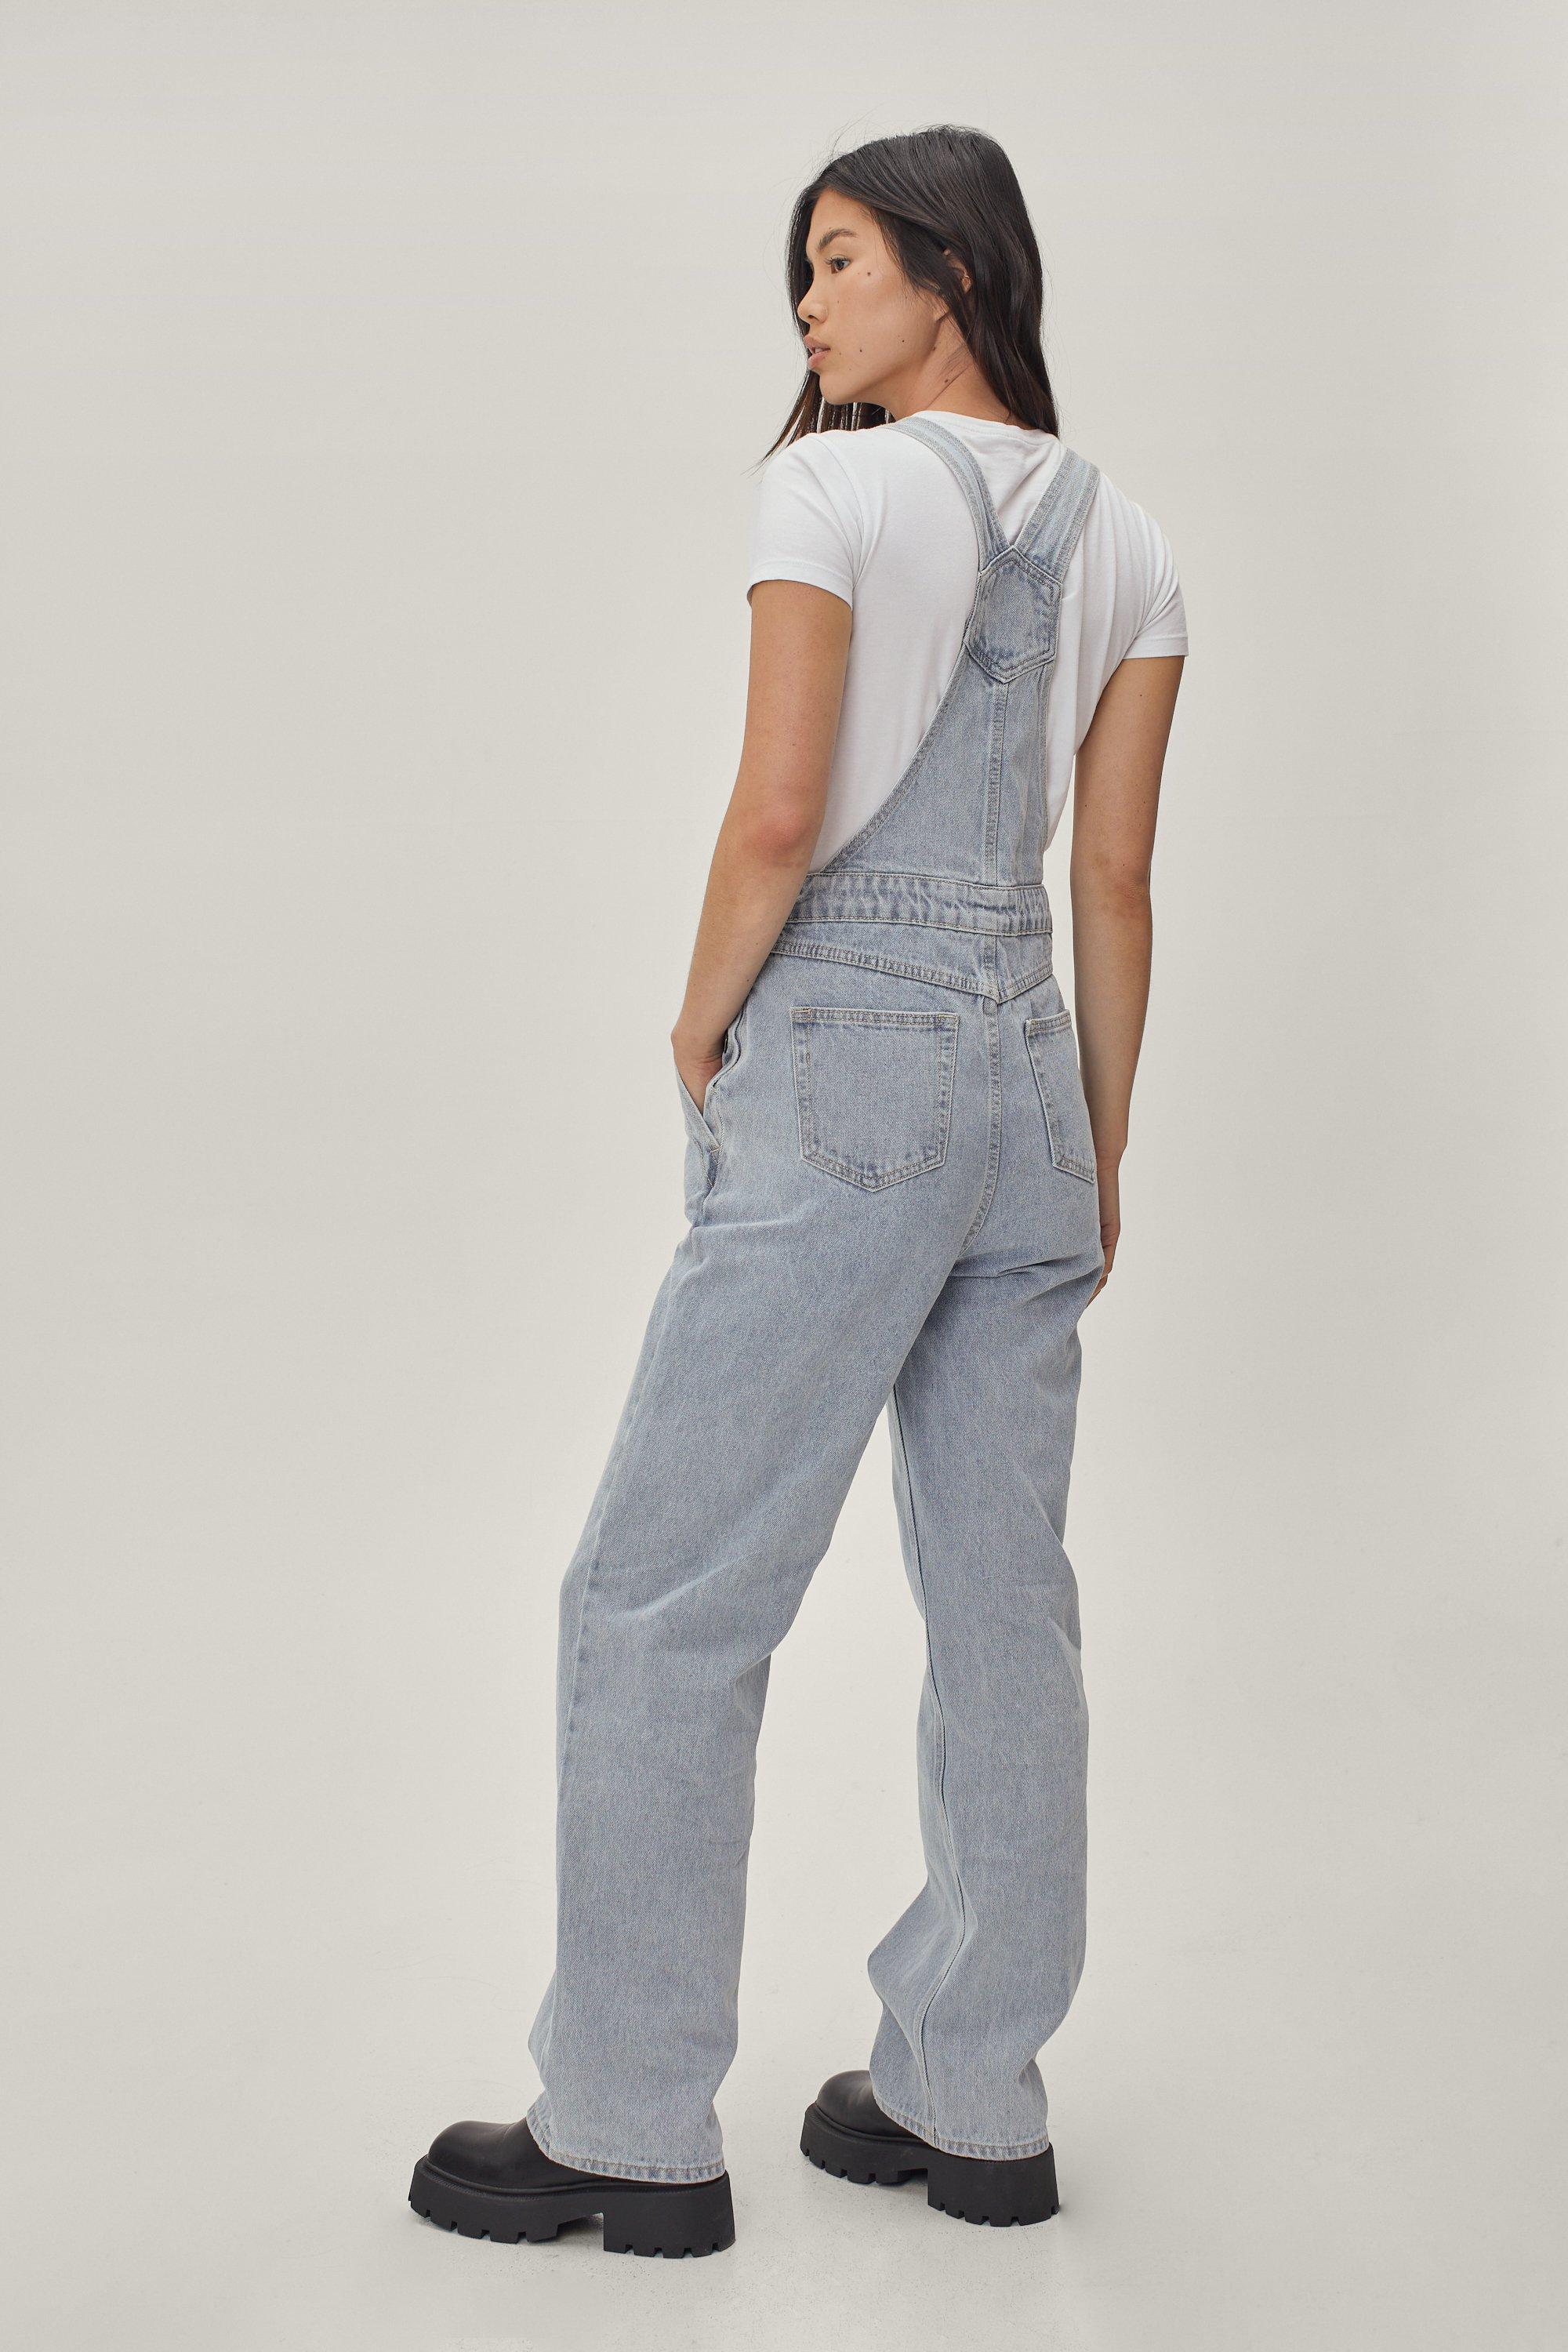 discount 79% Blue 34                  EU ONLY dungaree WOMEN FASHION Baby Jumpsuits & Dungarees Jean Dungaree 